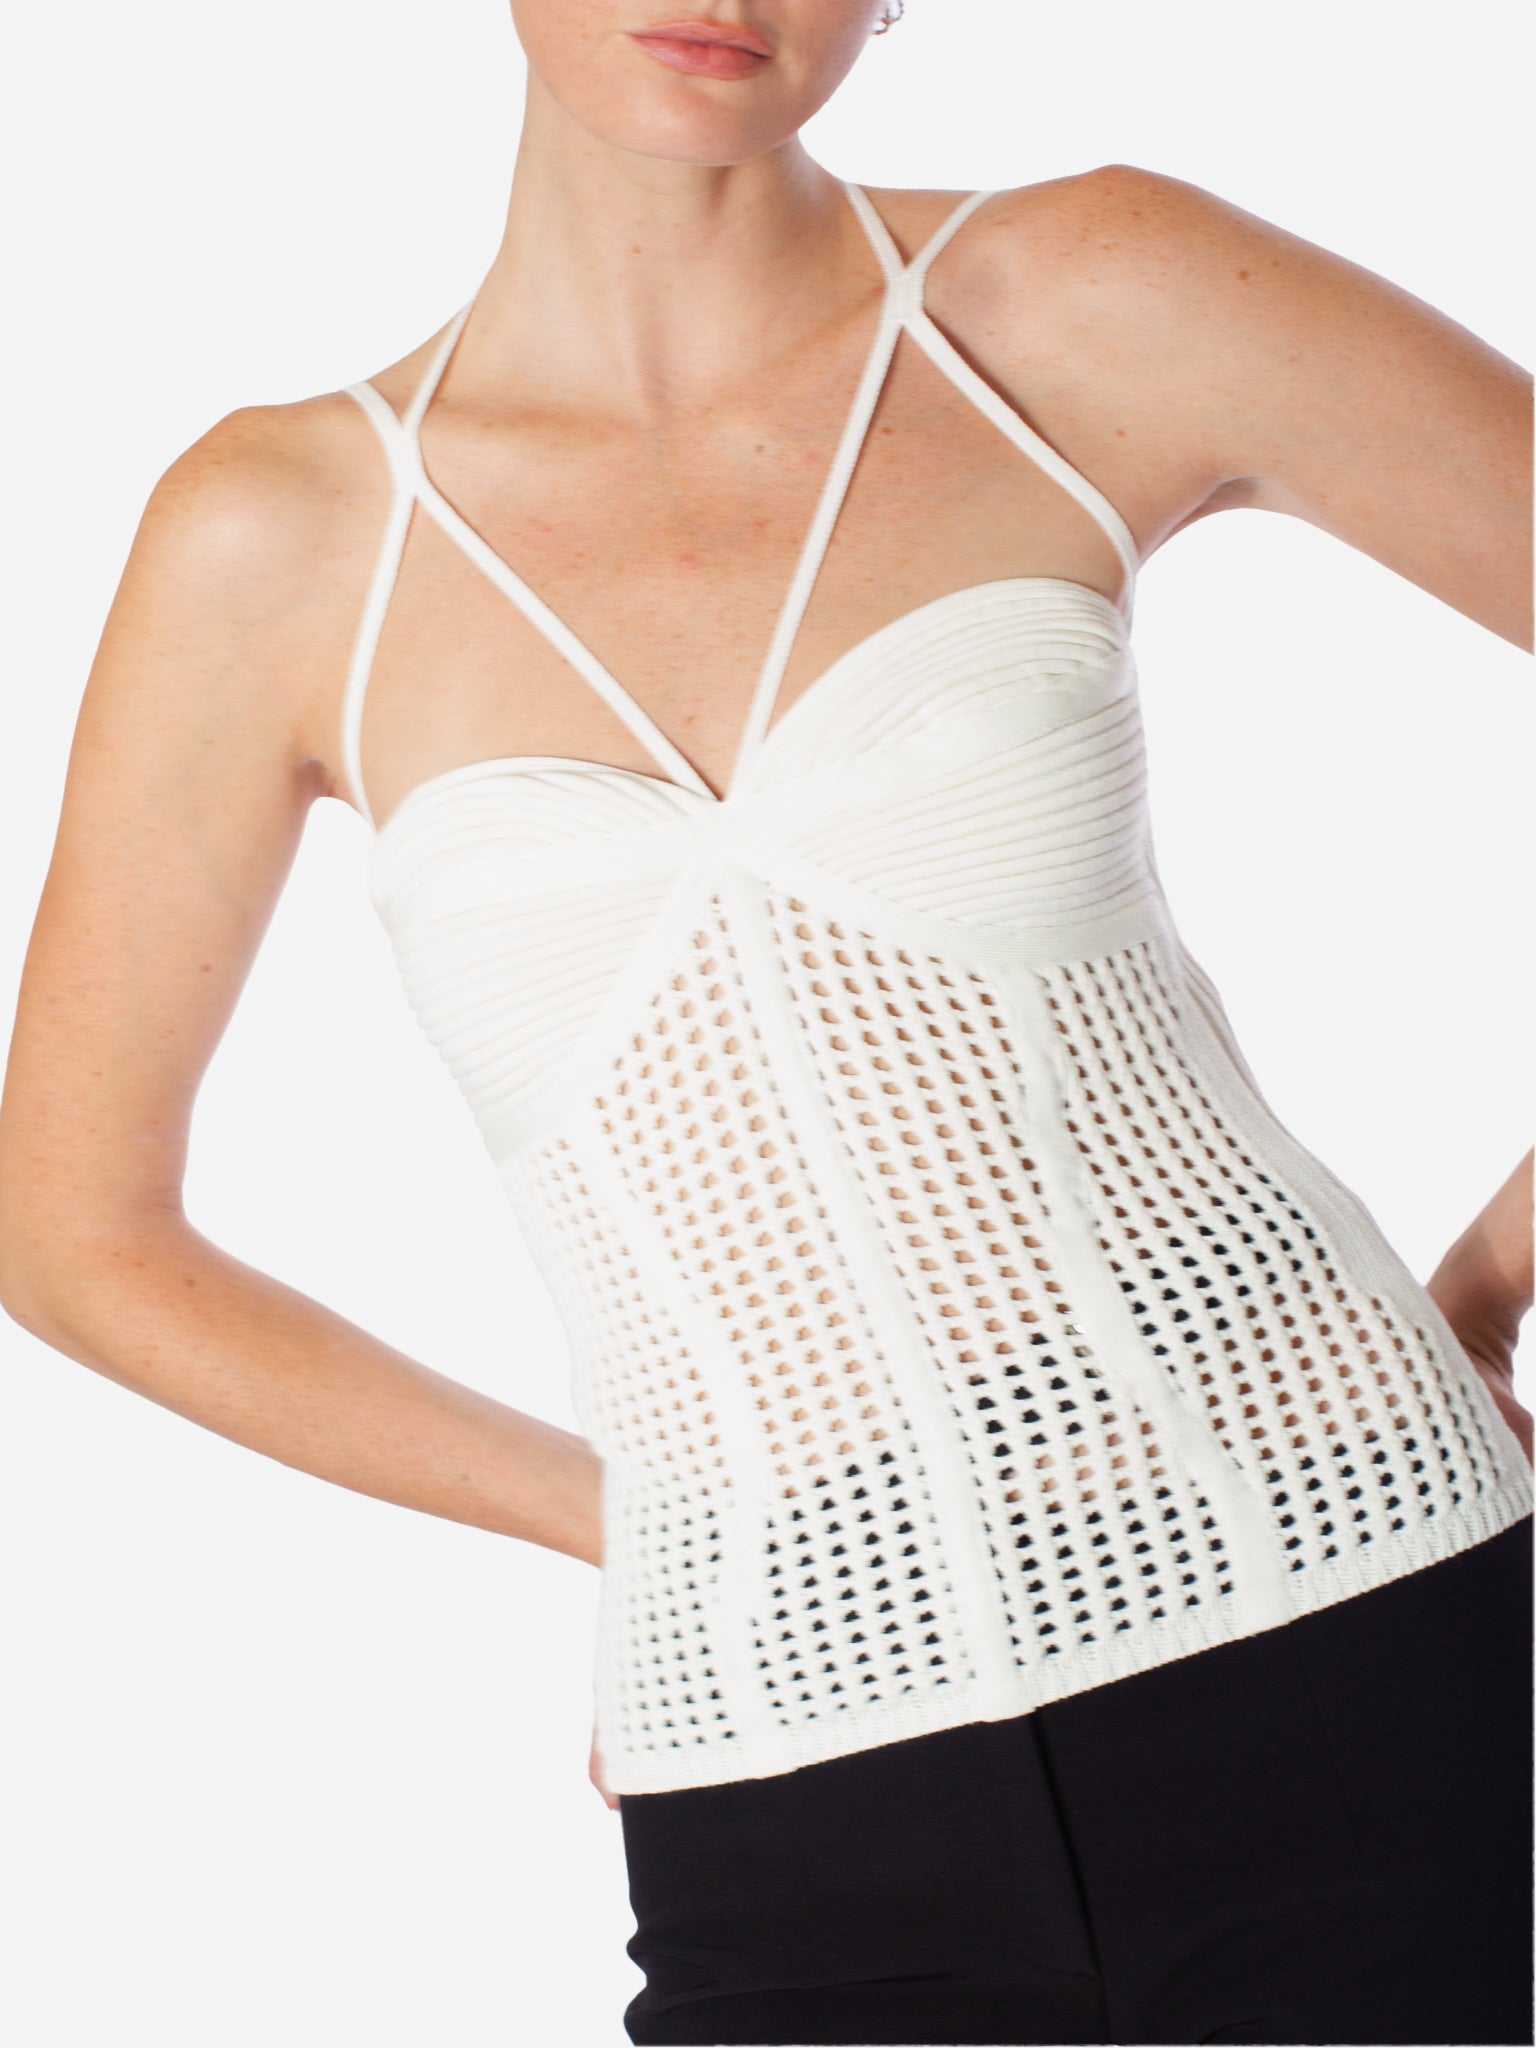 ANDREADAMO Floating Rib Corset with Spiral details – SHOPCURVE